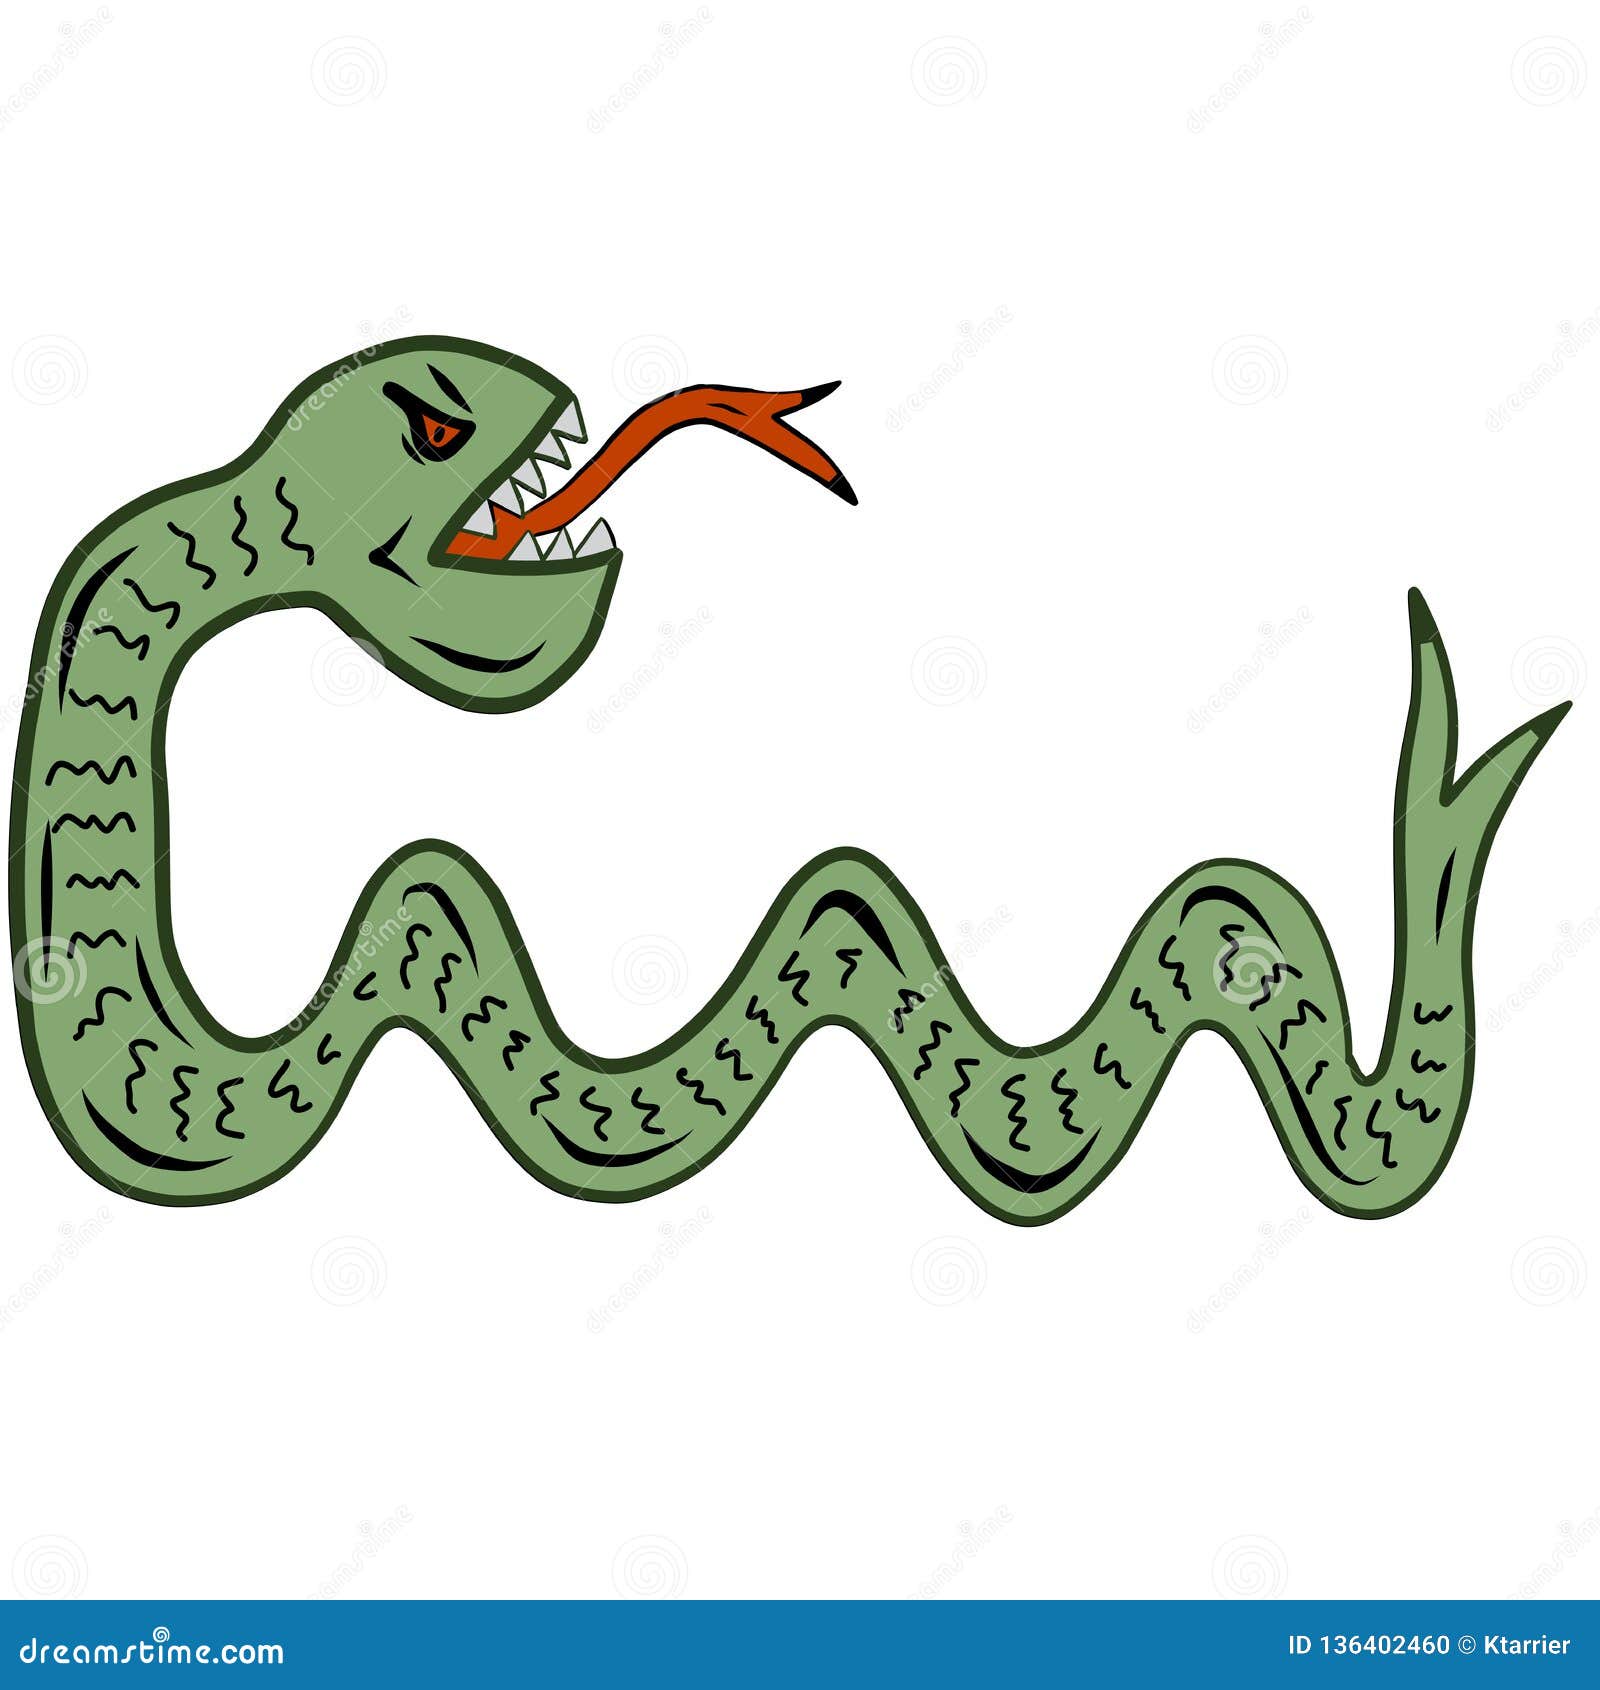 Cartoon of a a Green Snake Monster Stock Vector - Illustration of monster,  tongue: 136402460